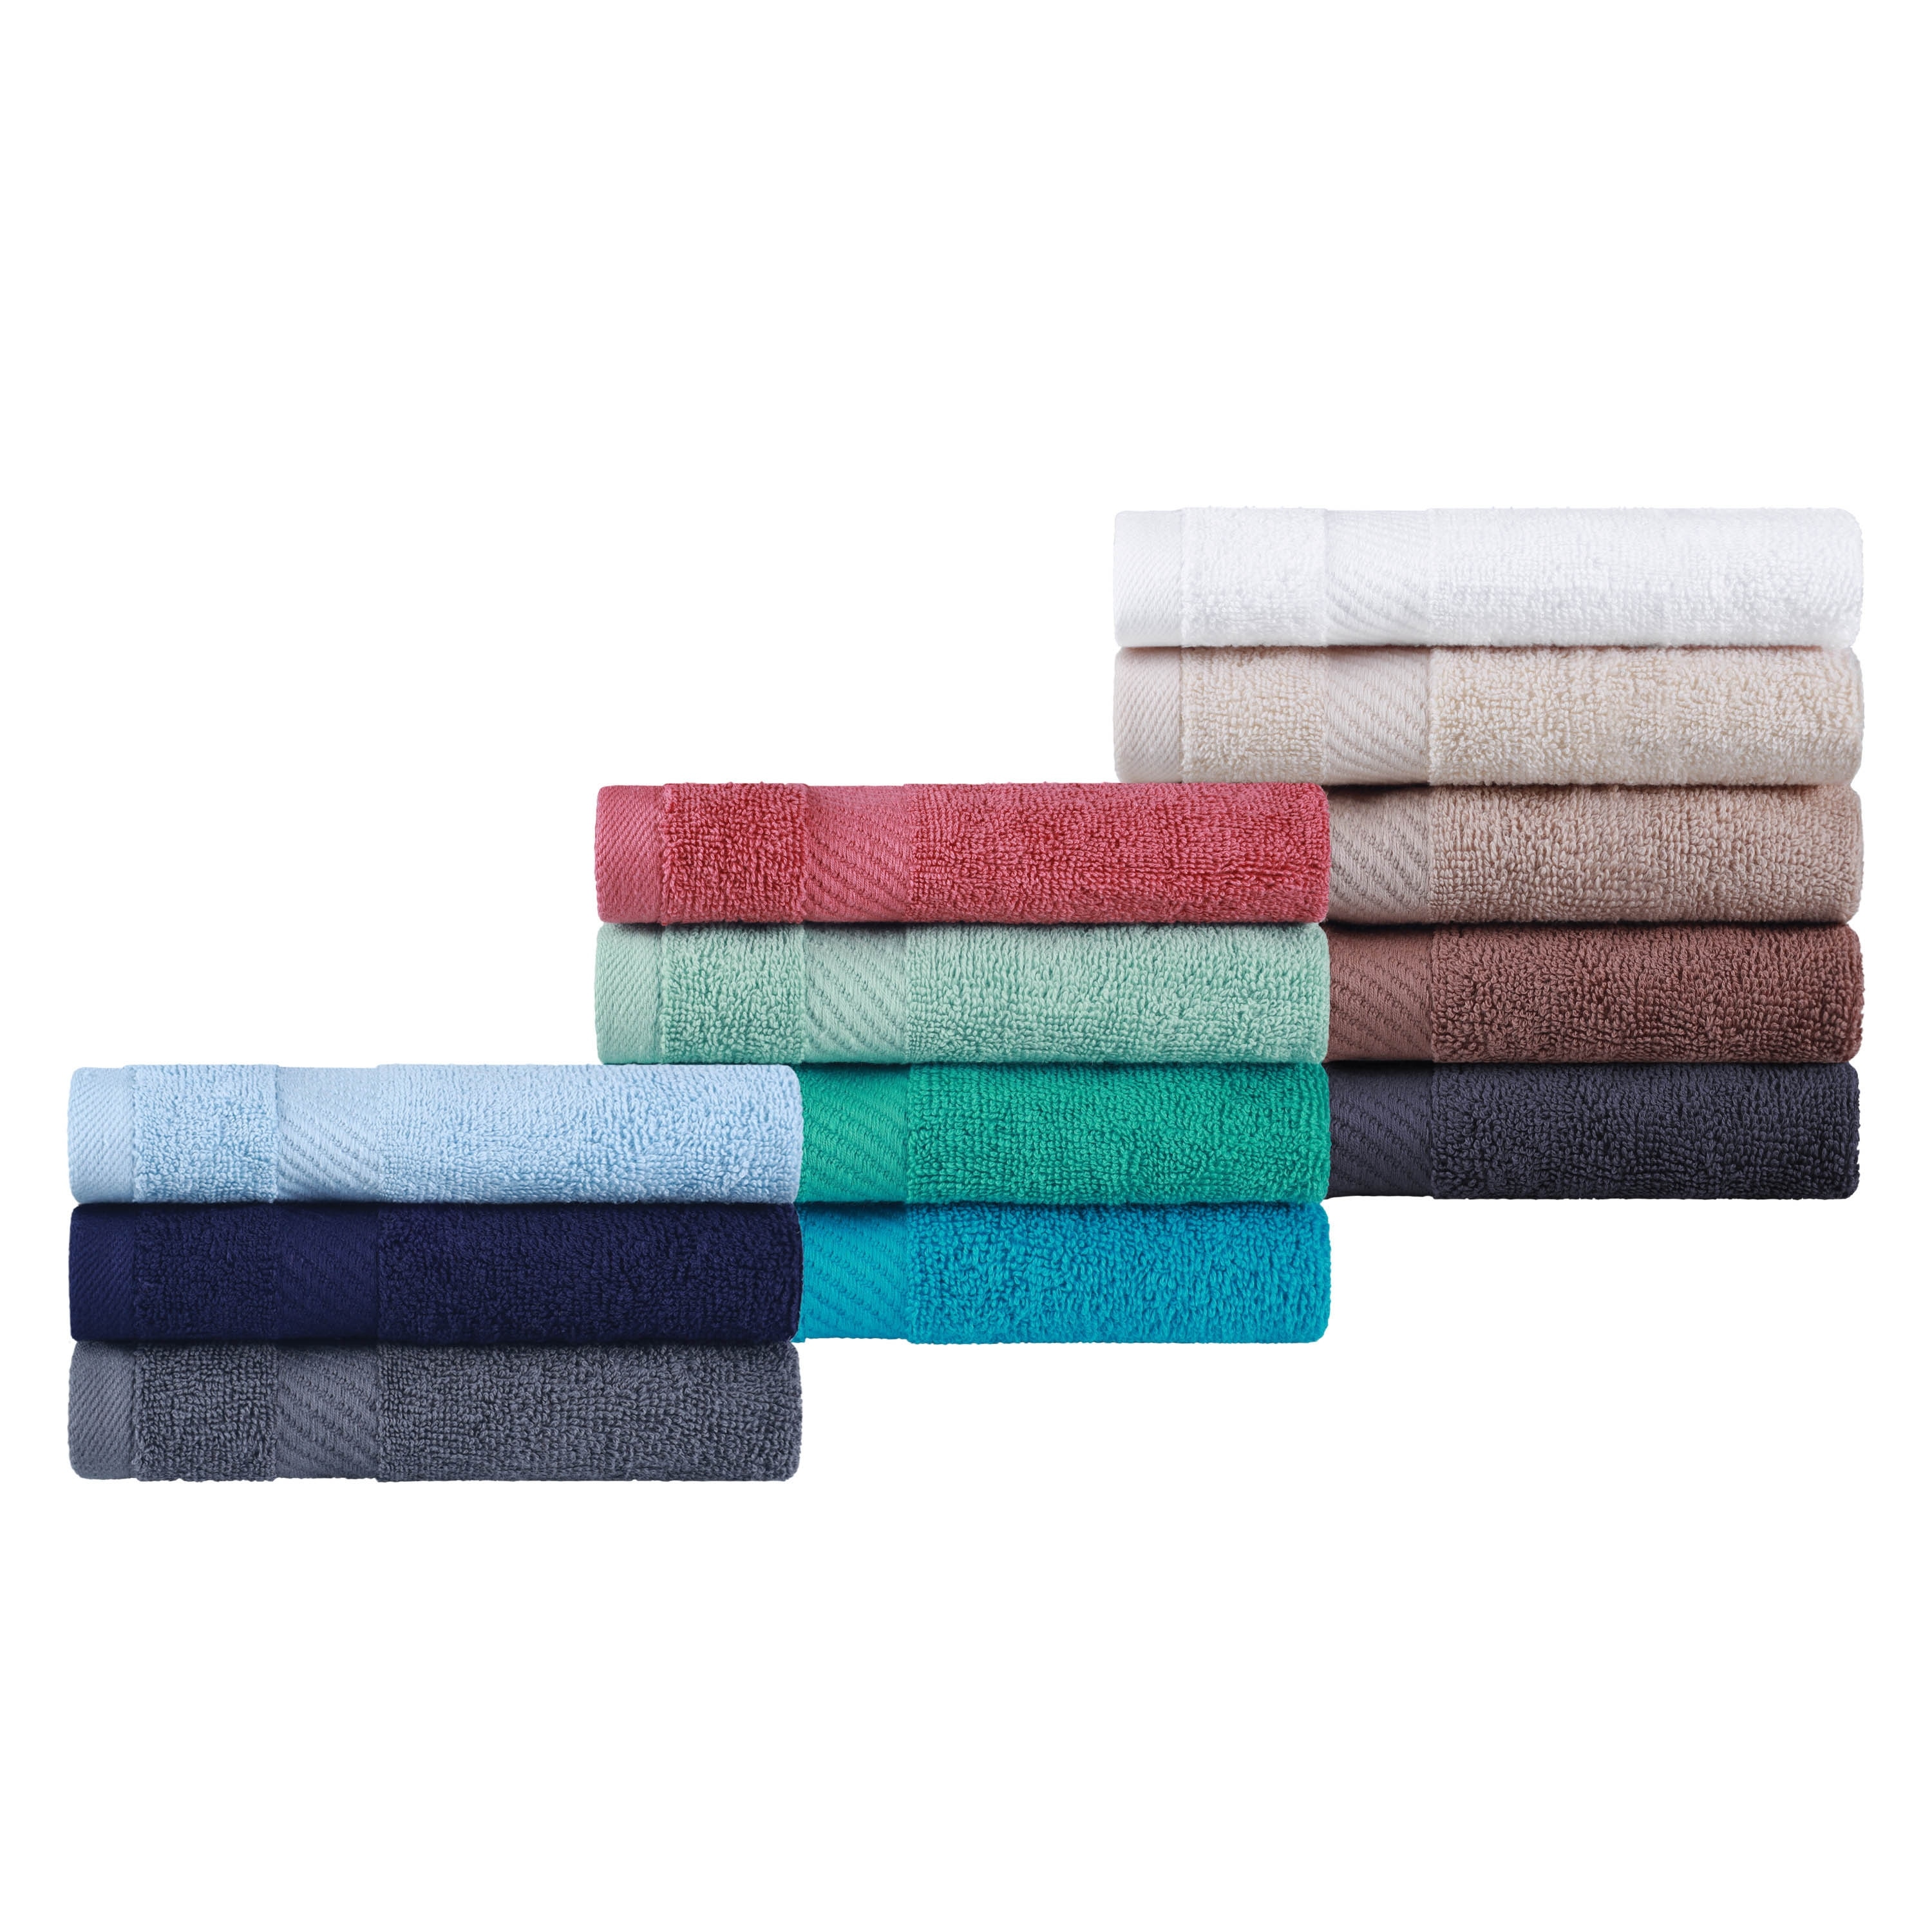 https://ak1.ostkcdn.com/images/products/is/images/direct/f804c01541c02737365dd7a0a84dc8962ca0af40/Miranda-Haus-Luxury-Solid-Highly-Absorbent-Egyptian-Cotton-6-Piece-Hand-Towel-Set.jpg